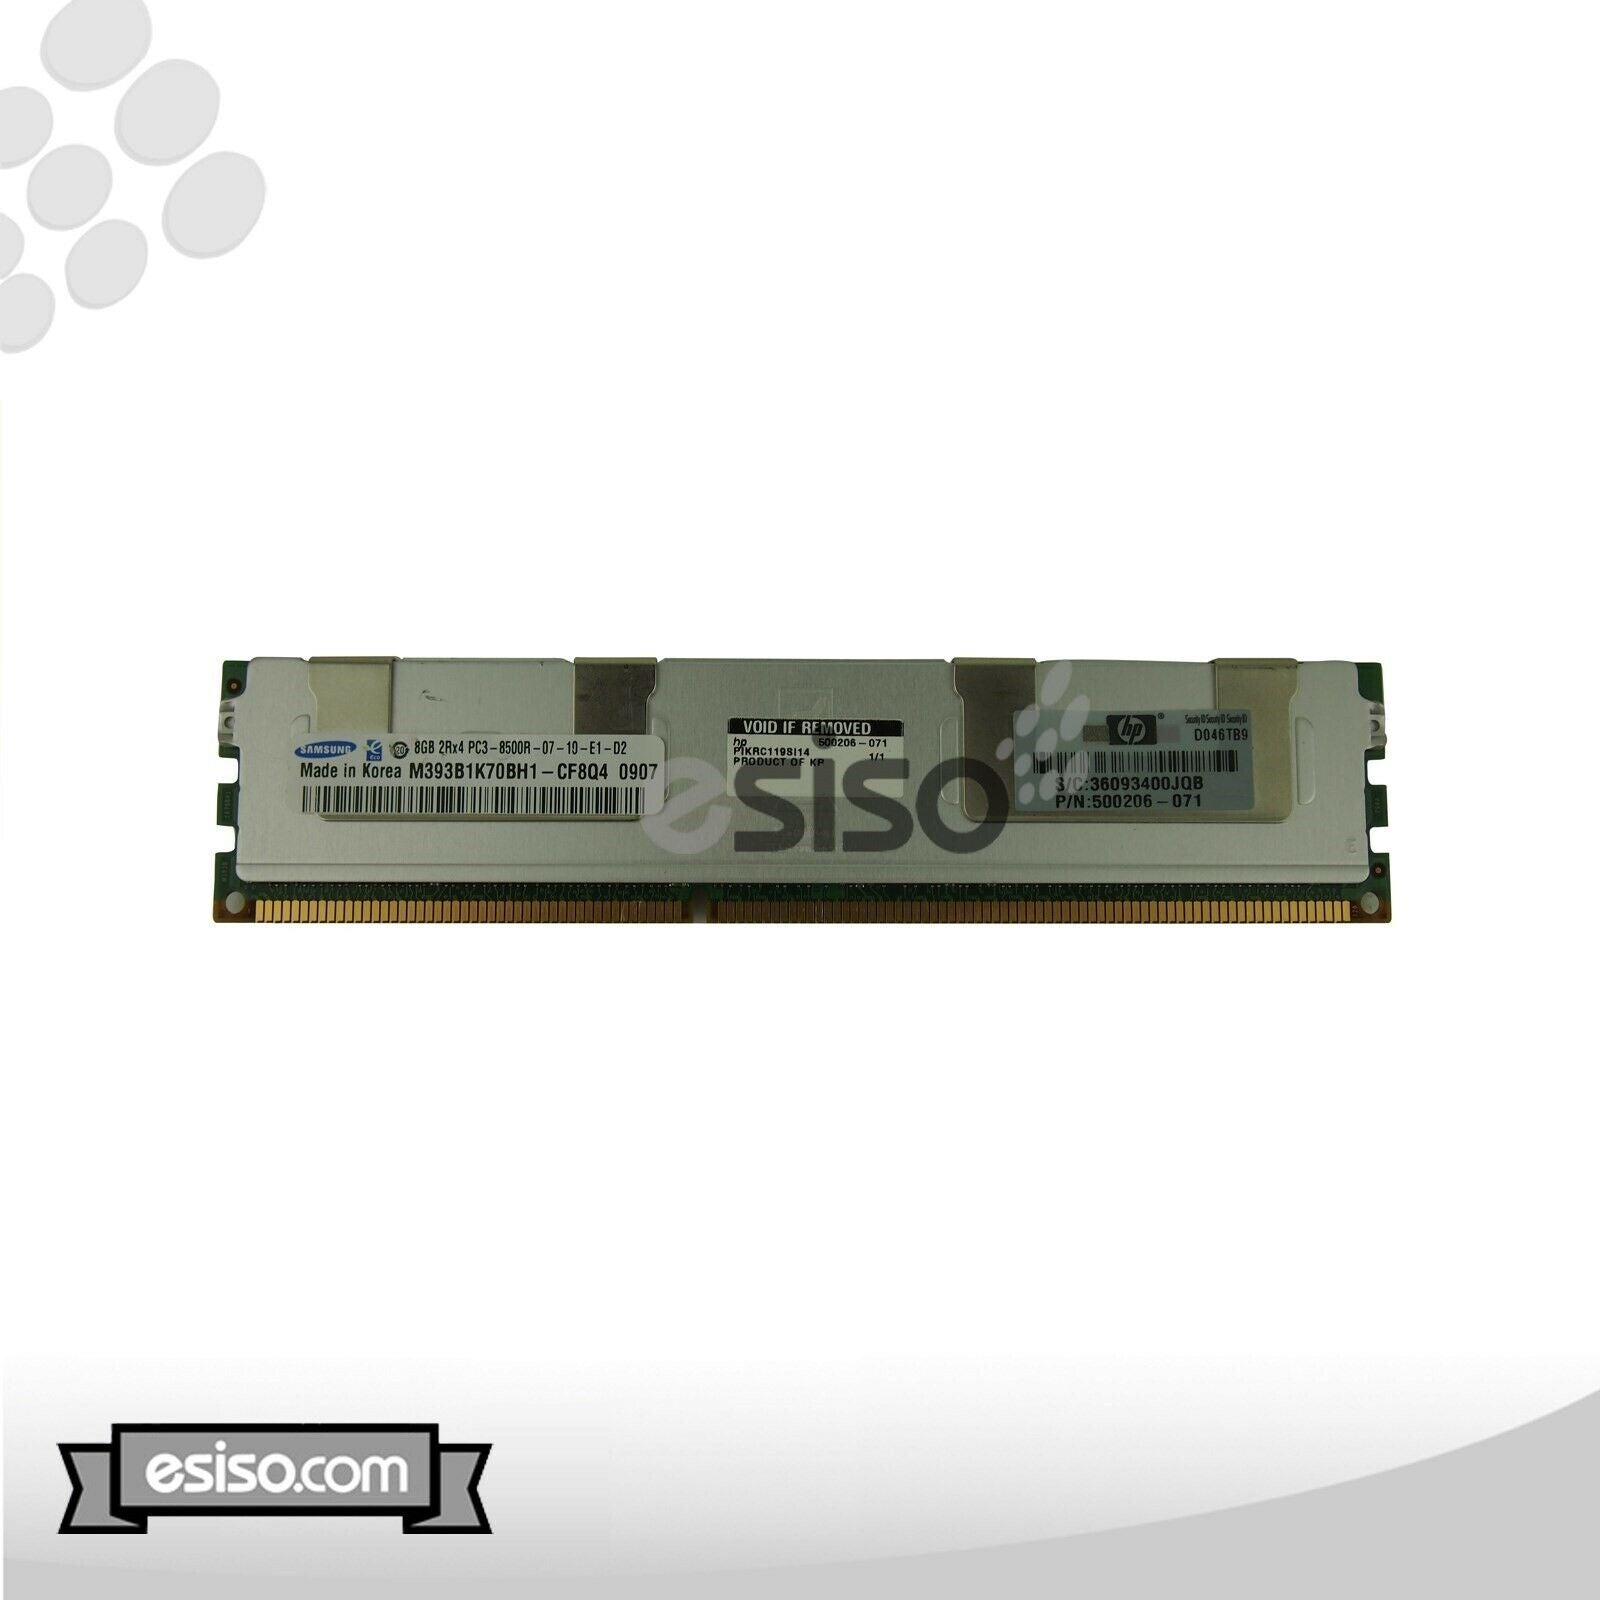 519201-001 HPE 8GB (1X8GB) 2RX4 PC3-8500R MEMORY FOR G6